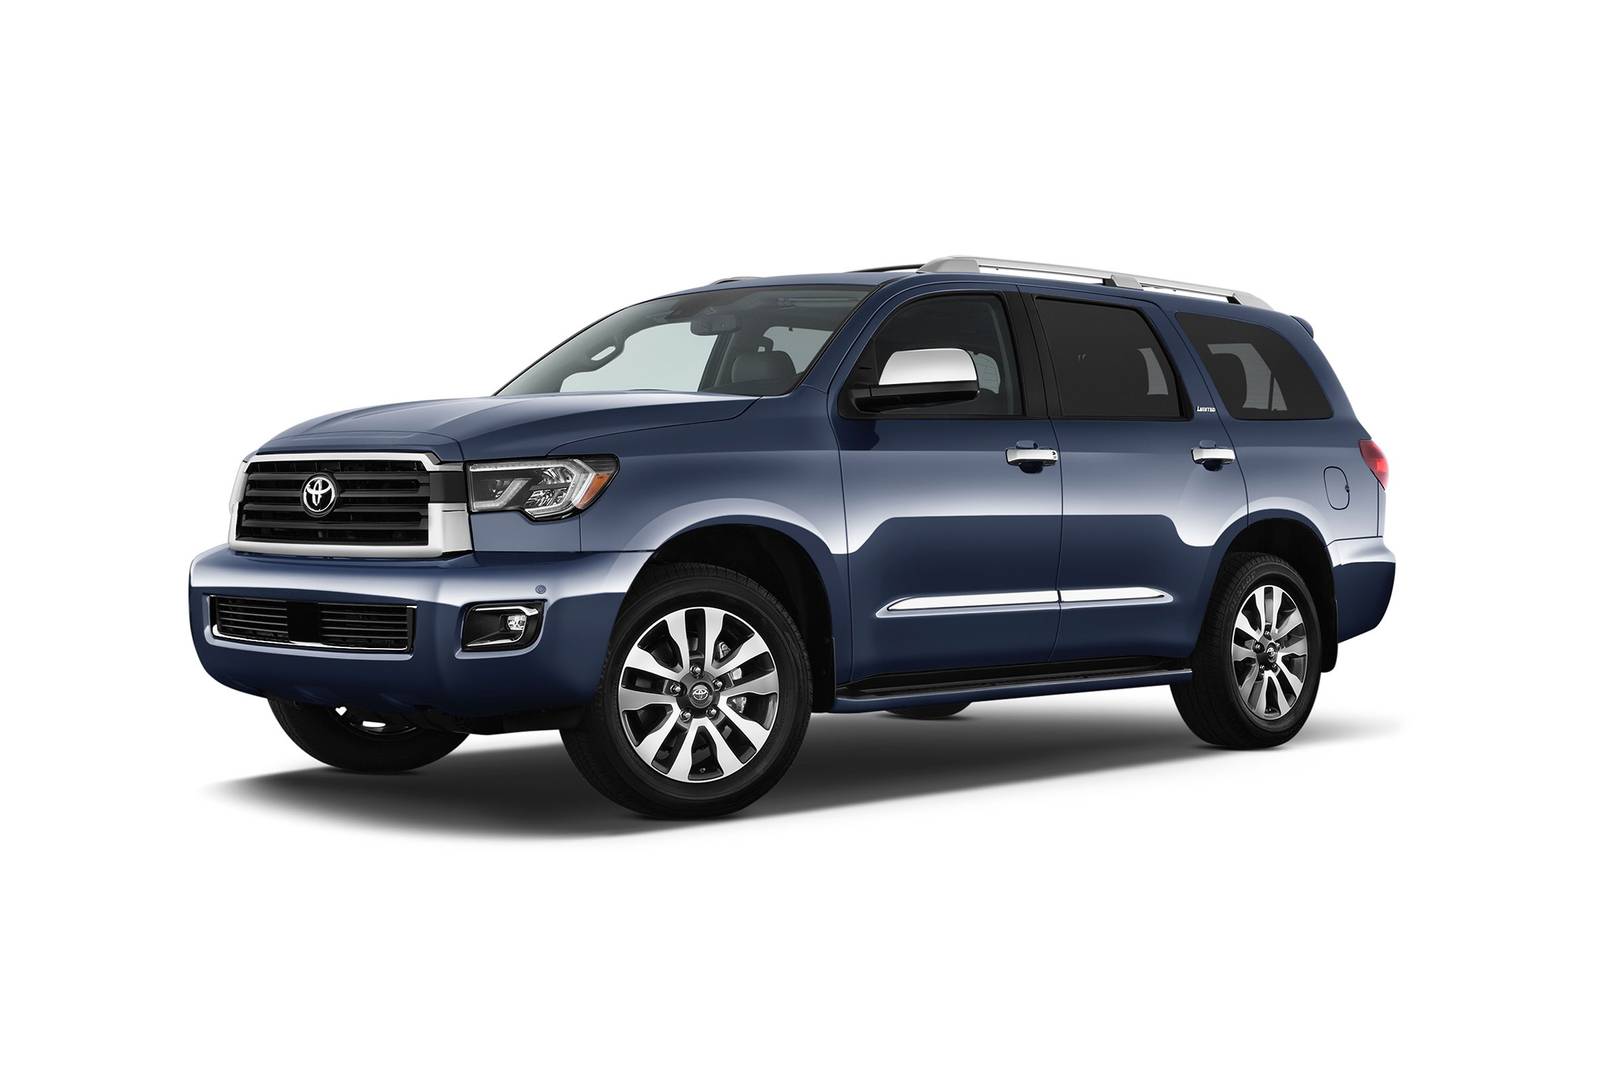 2021 Toyota Sequoia Review & Ratings